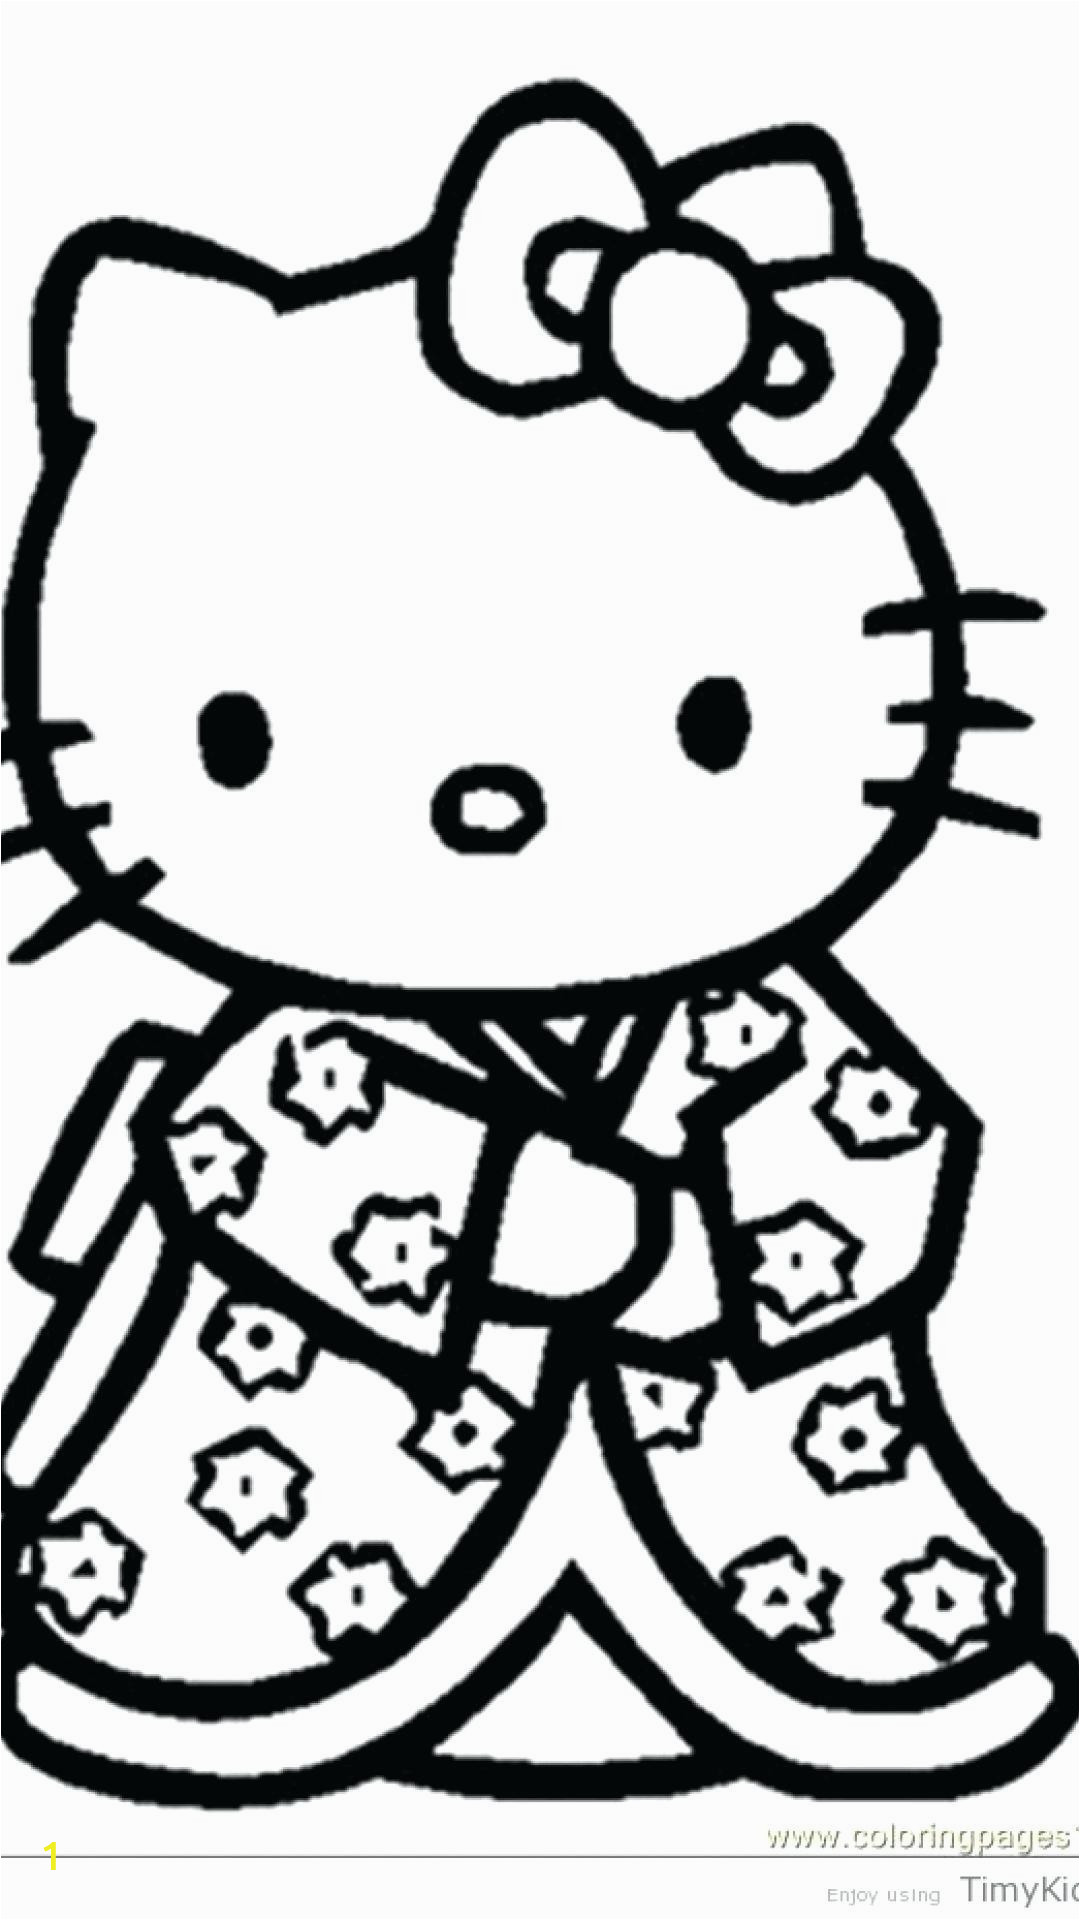 Coloring Pages Hello Kitty Mermaid Coloring Pages Hello Kitty Mermaid Coloring Pages Hello